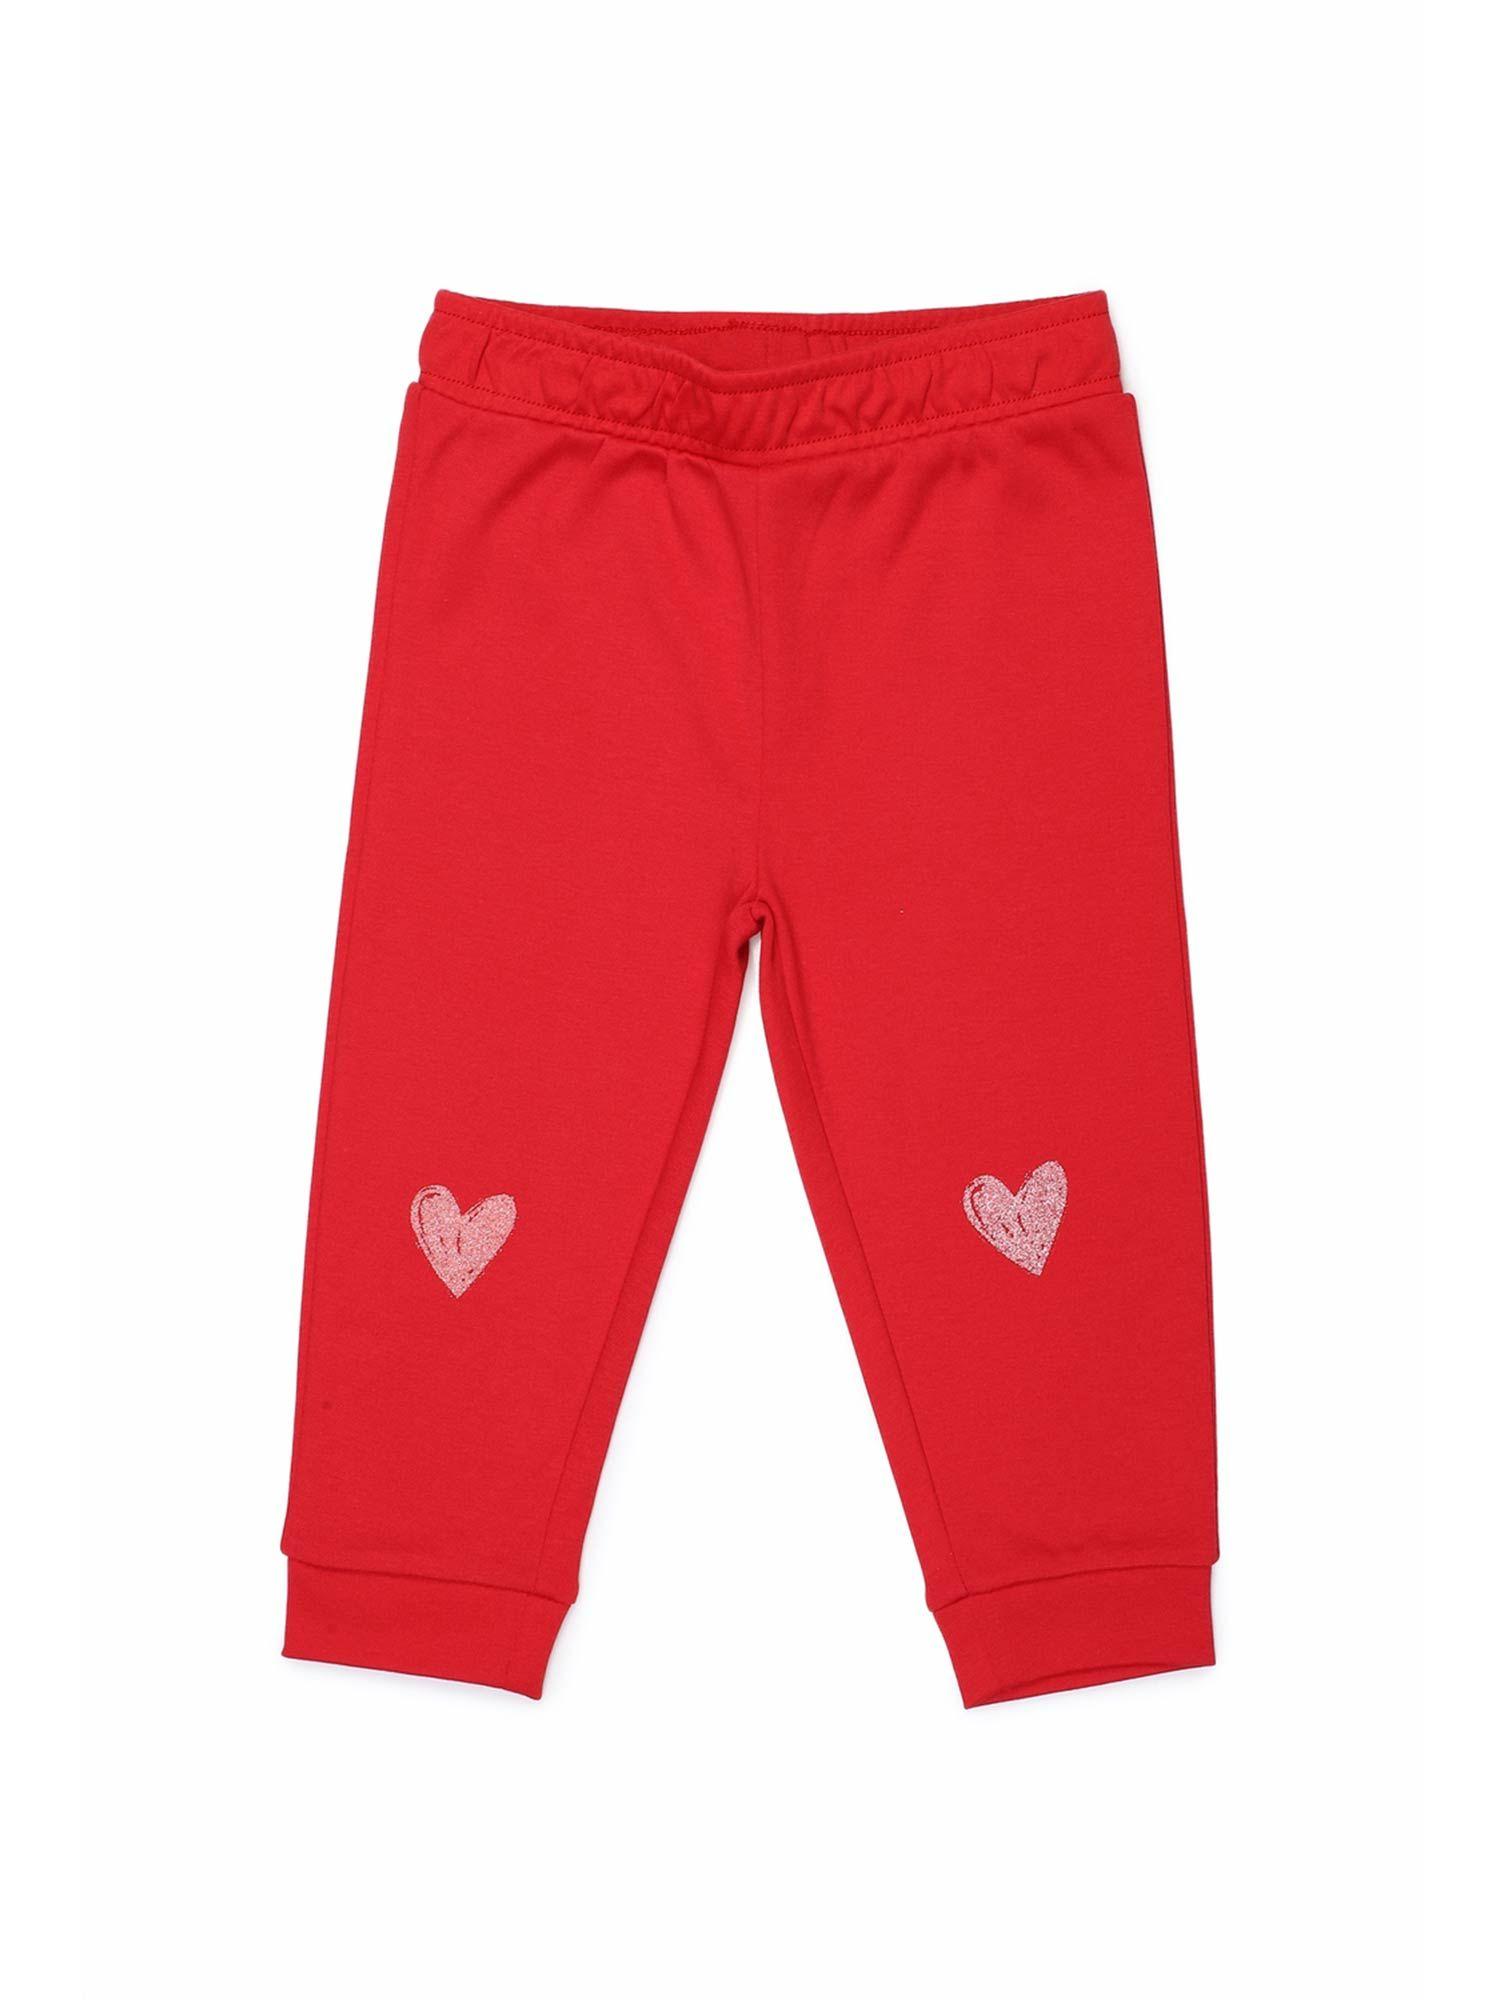 red-track-pants